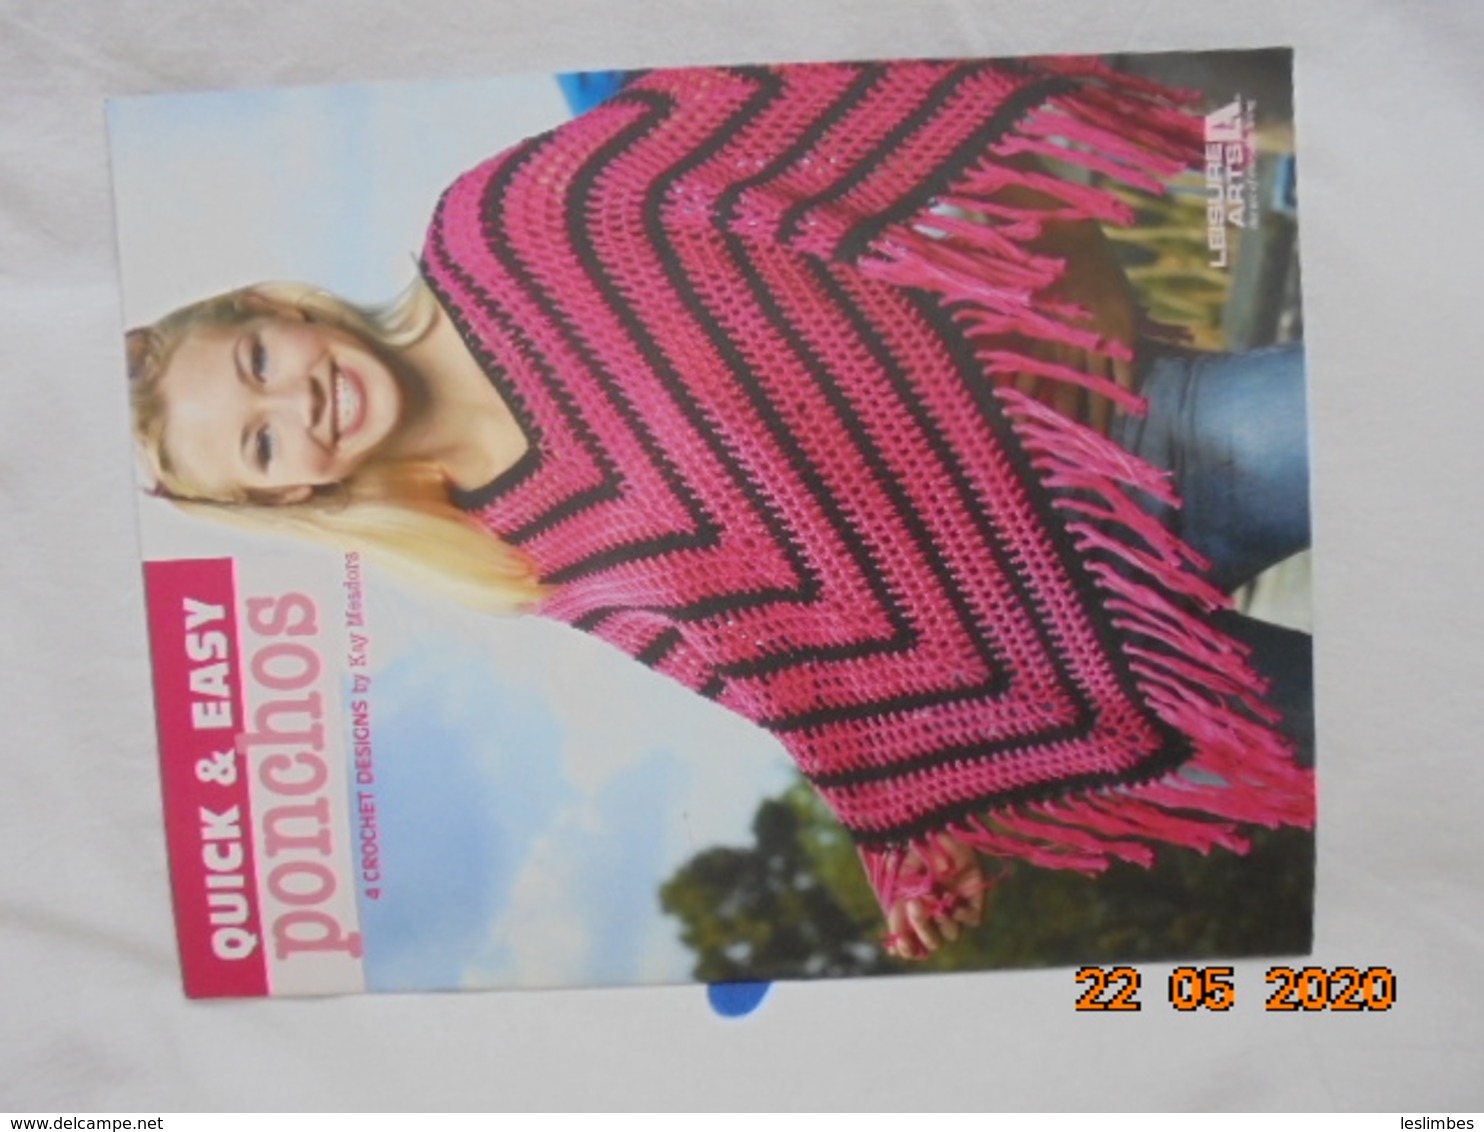 Quick & Easy Ponchos: 4 Crochet Designs. Leisure Arts 3975 By Kay Meadors -- 2004 - Crafts